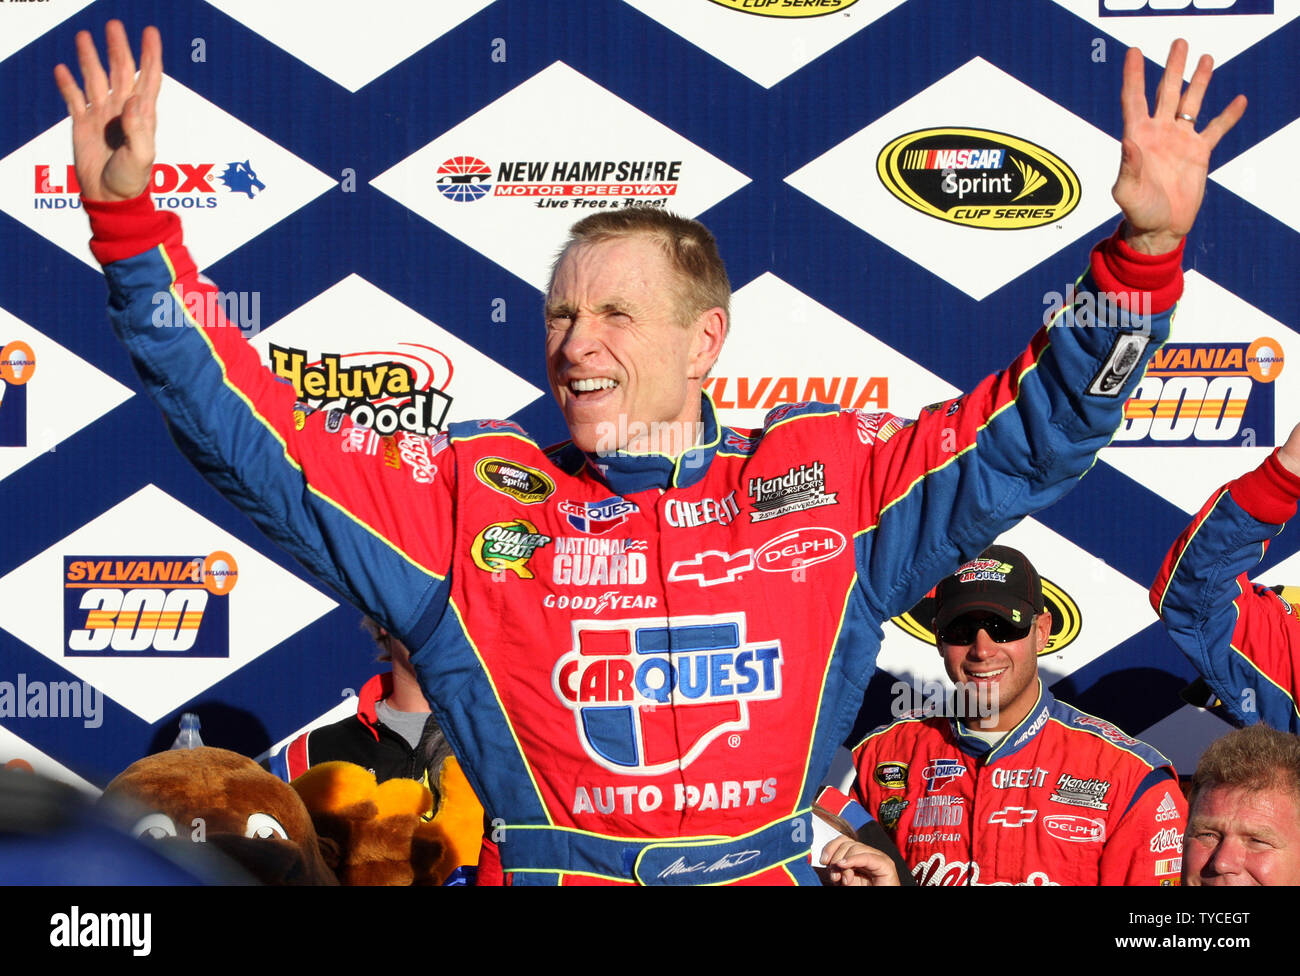 Mark Martin celebrates winning the NASCAR Sprint Cup series Sylvania 300 at New Hampshire Motor Speedway in Loudon, New Hampshire, September 20, 2009.  UPI/Malcolm Hope Stock Photo